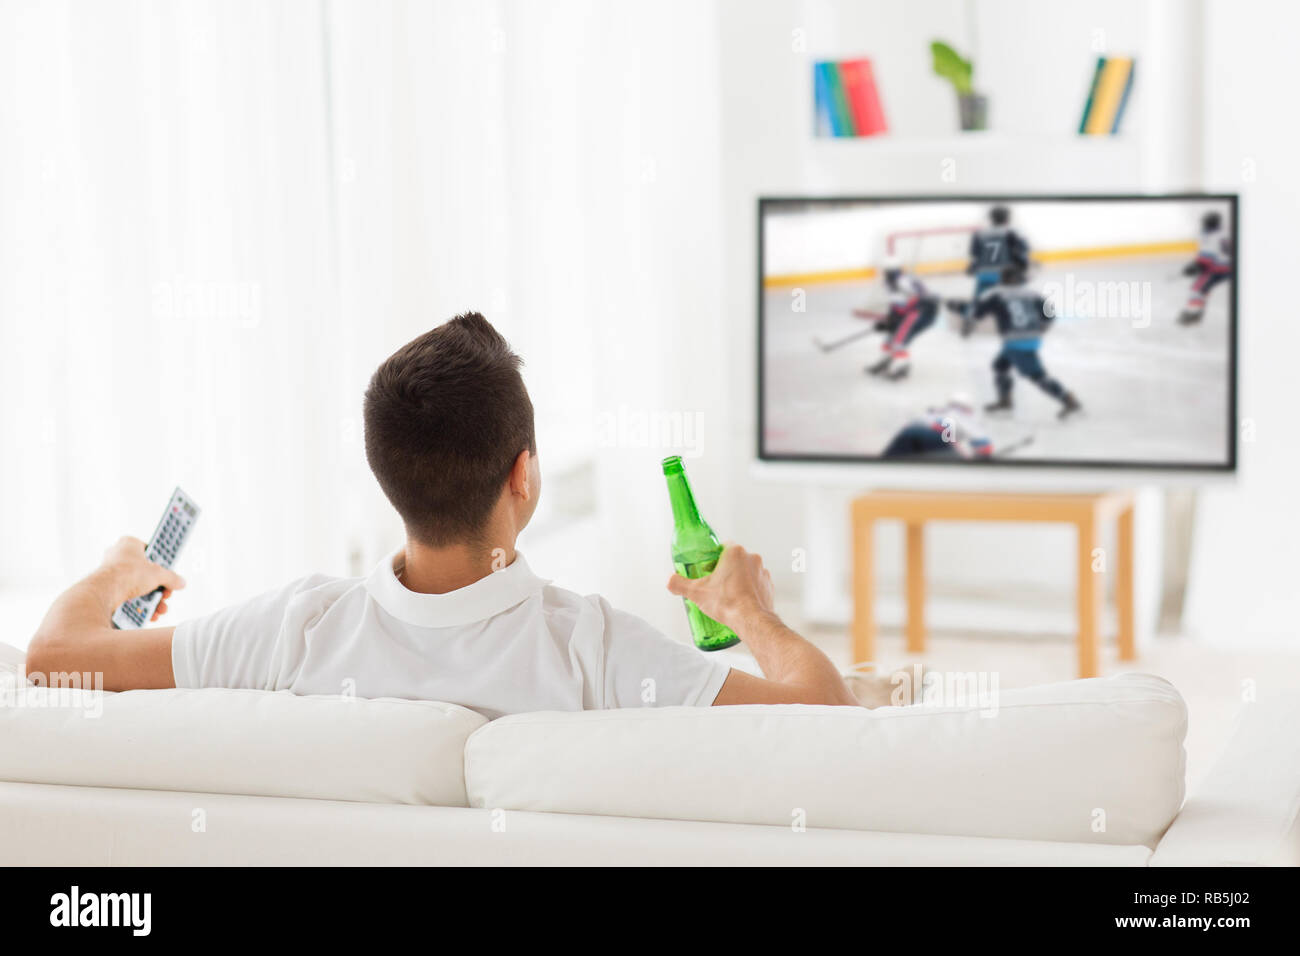 man watching ice hockey on tv and drinking beer Stock Photo